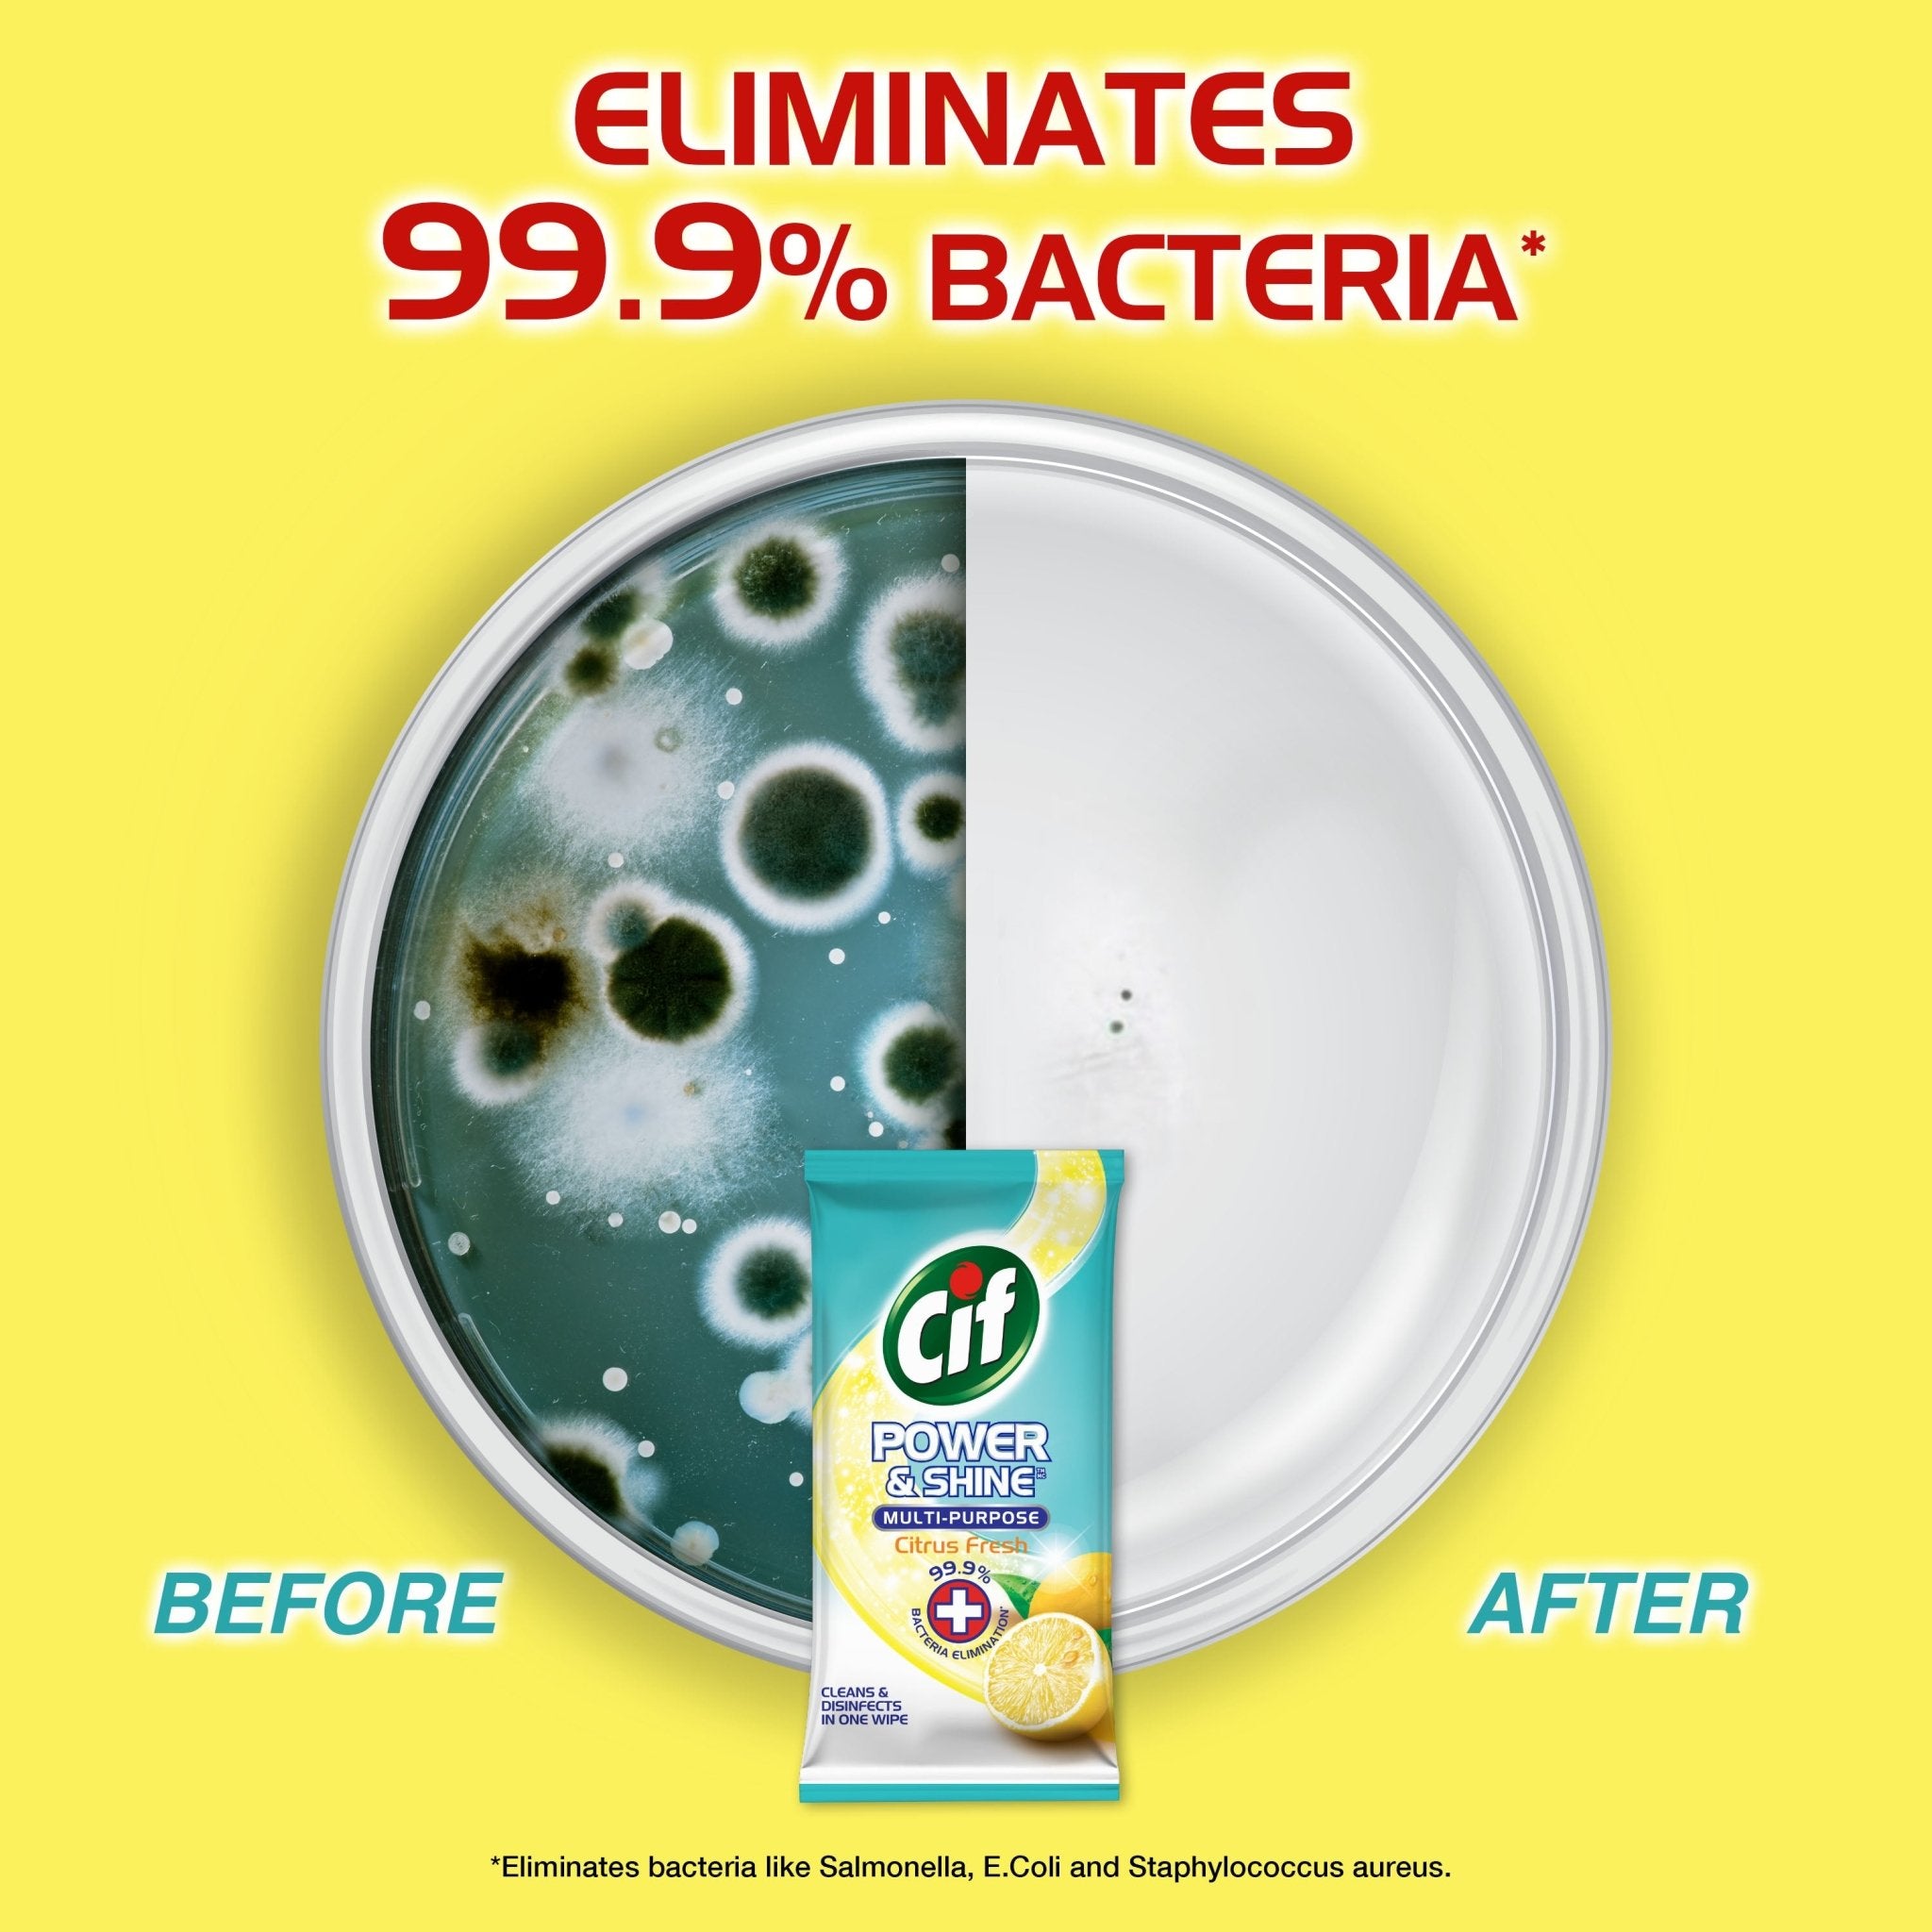 Cif Disinfecting Wipes BUY 1 GET 1 FREE - Unilever Professional Philippines